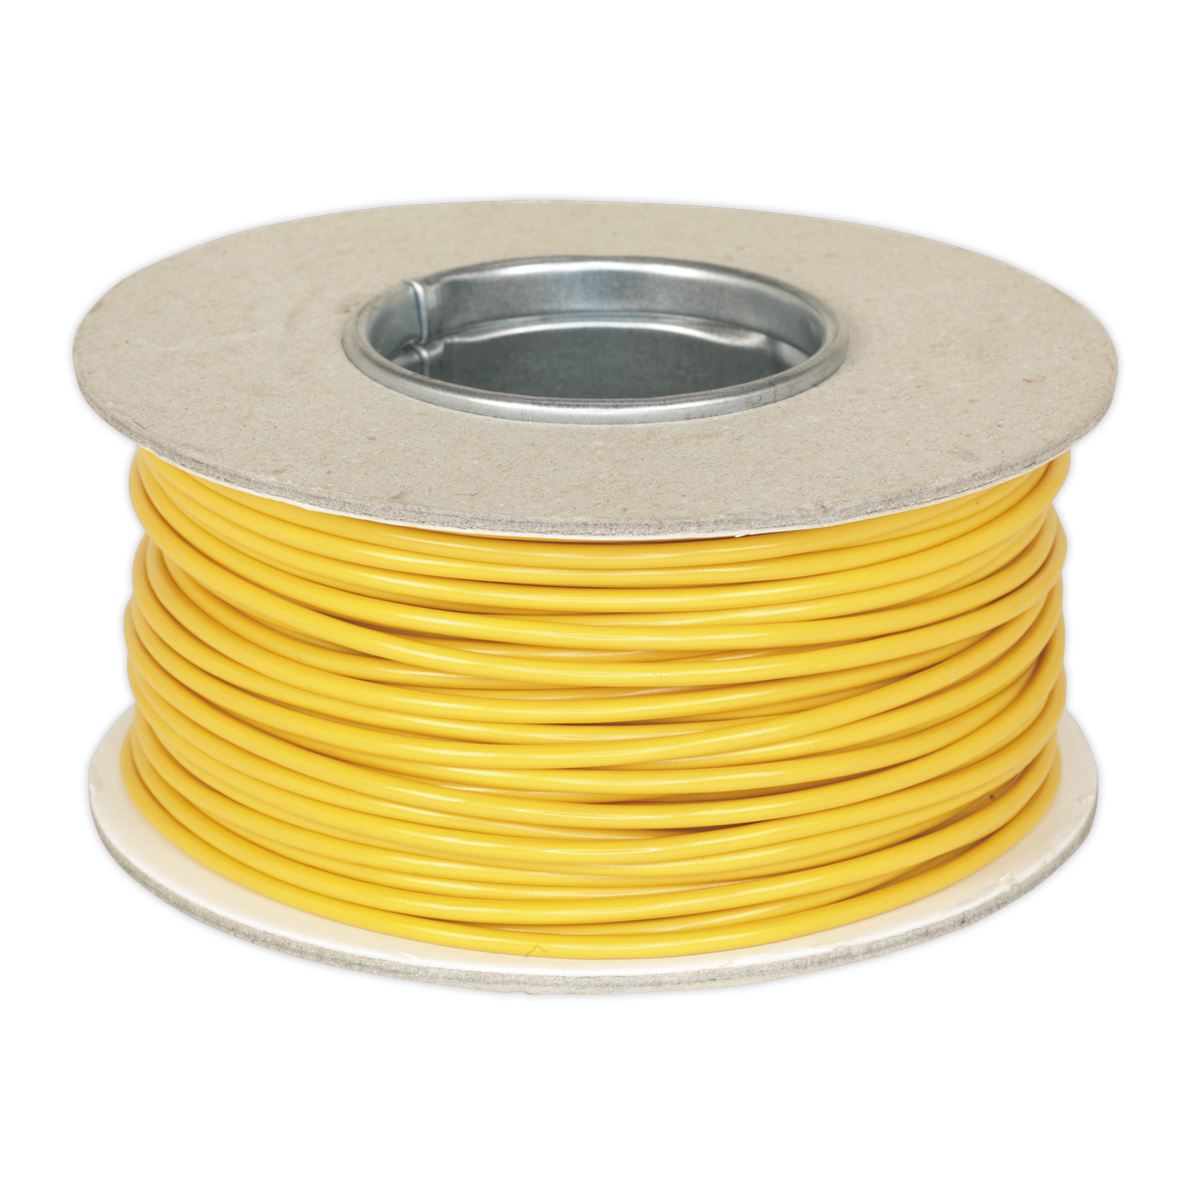 Sealey Automotive Cable Thin Wall Single 2mm² 28/0.30mm 50m Yellow